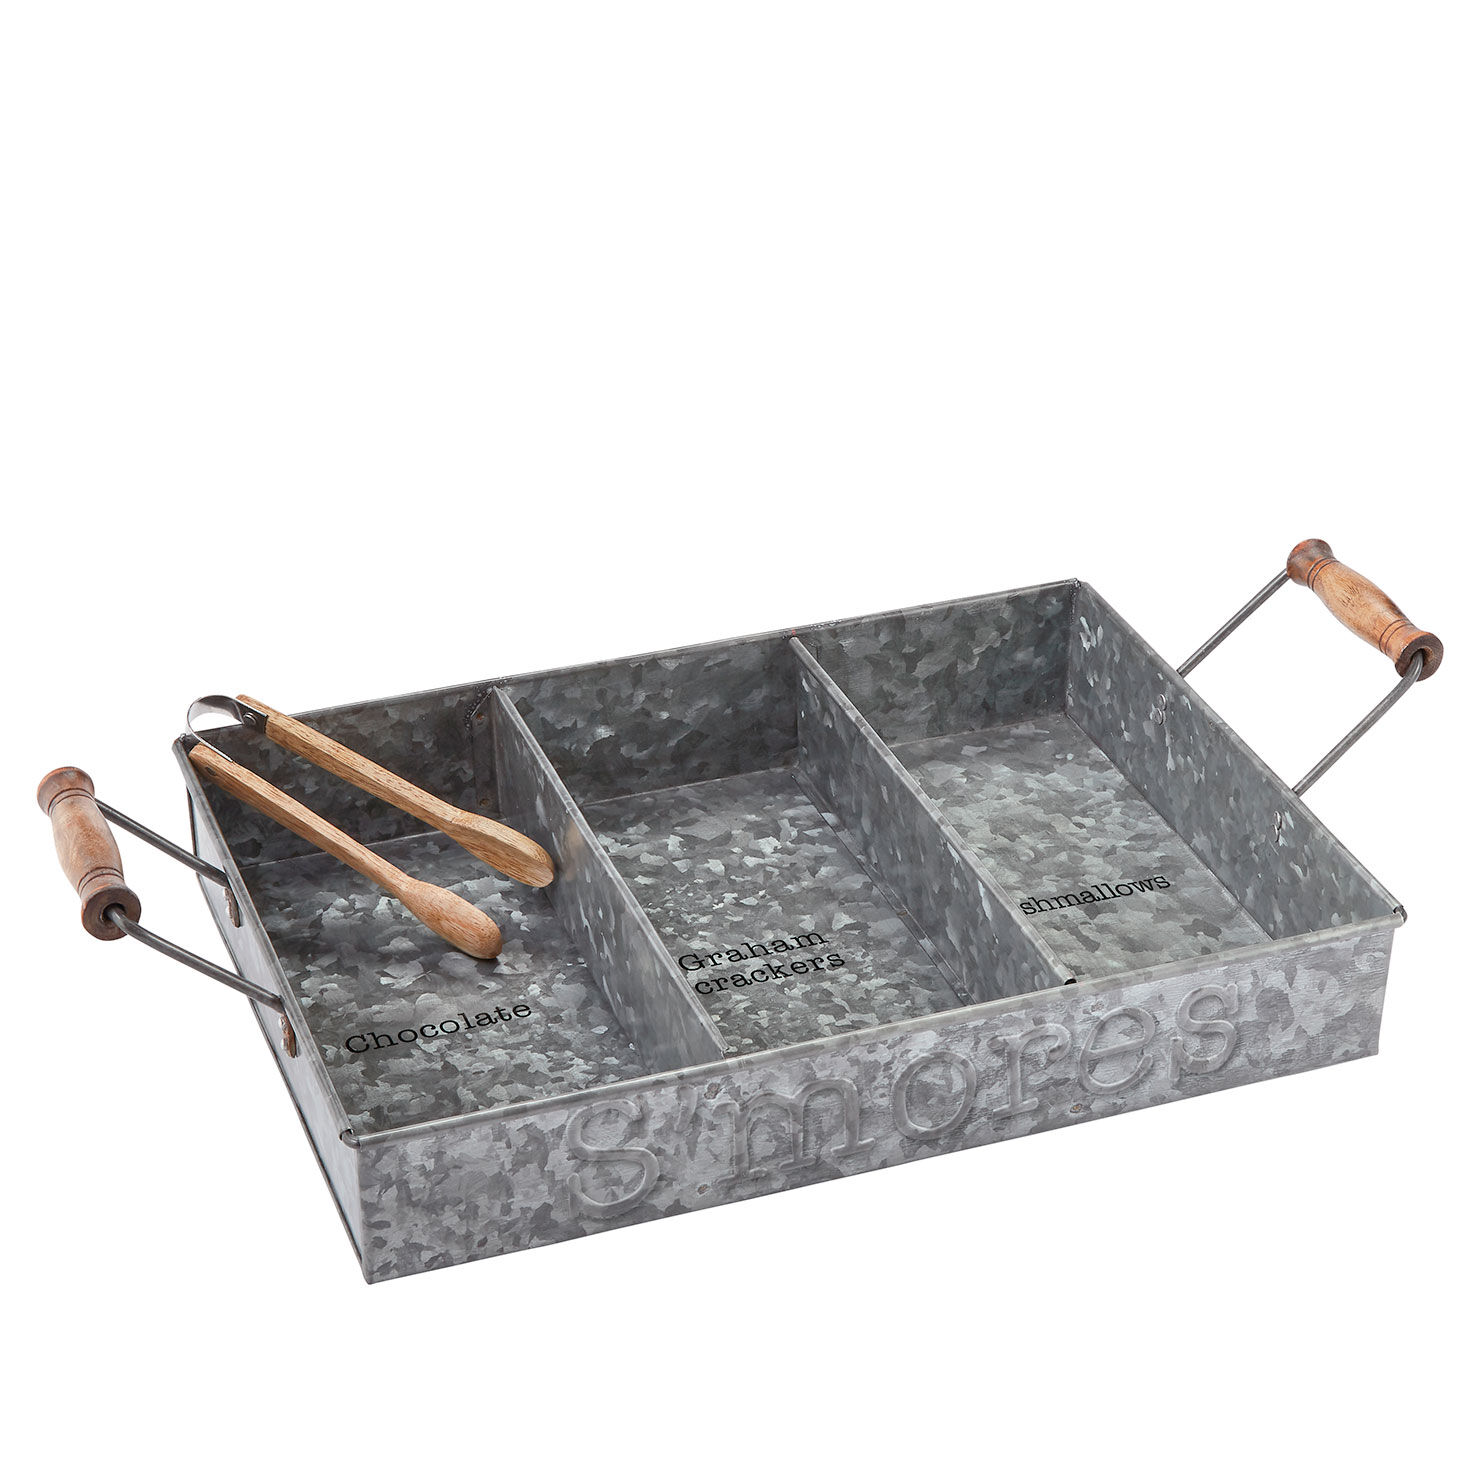 https://www.hallmark.com/dw/image/v2/AALB_PRD/on/demandware.static/-/Sites-hallmark-master/default/dw15701f8d/images/finished-goods/products/40700267/Smore-Tin-Organization-Tray-With-Tongs-Set_40700267_01.jpg?sfrm=jpg